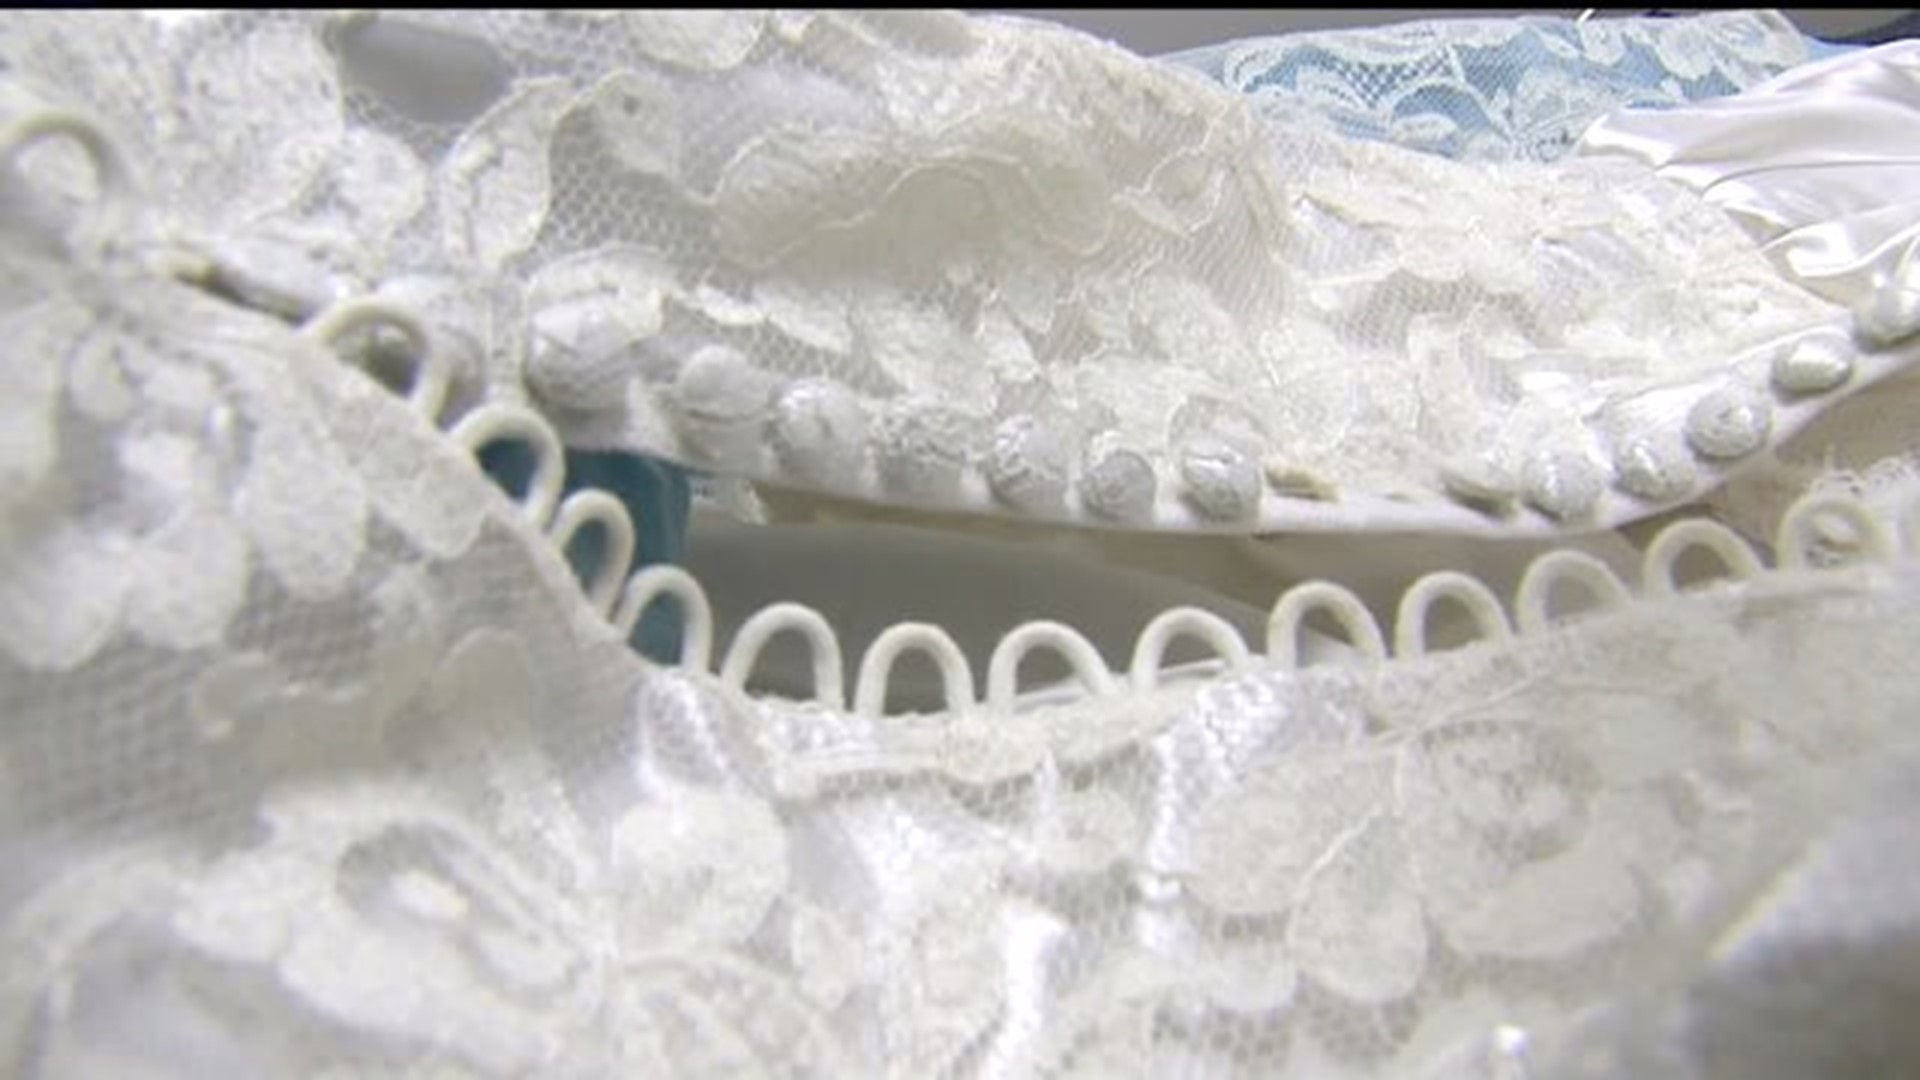 Owner has claimed dress found in Le Claire, Iowa